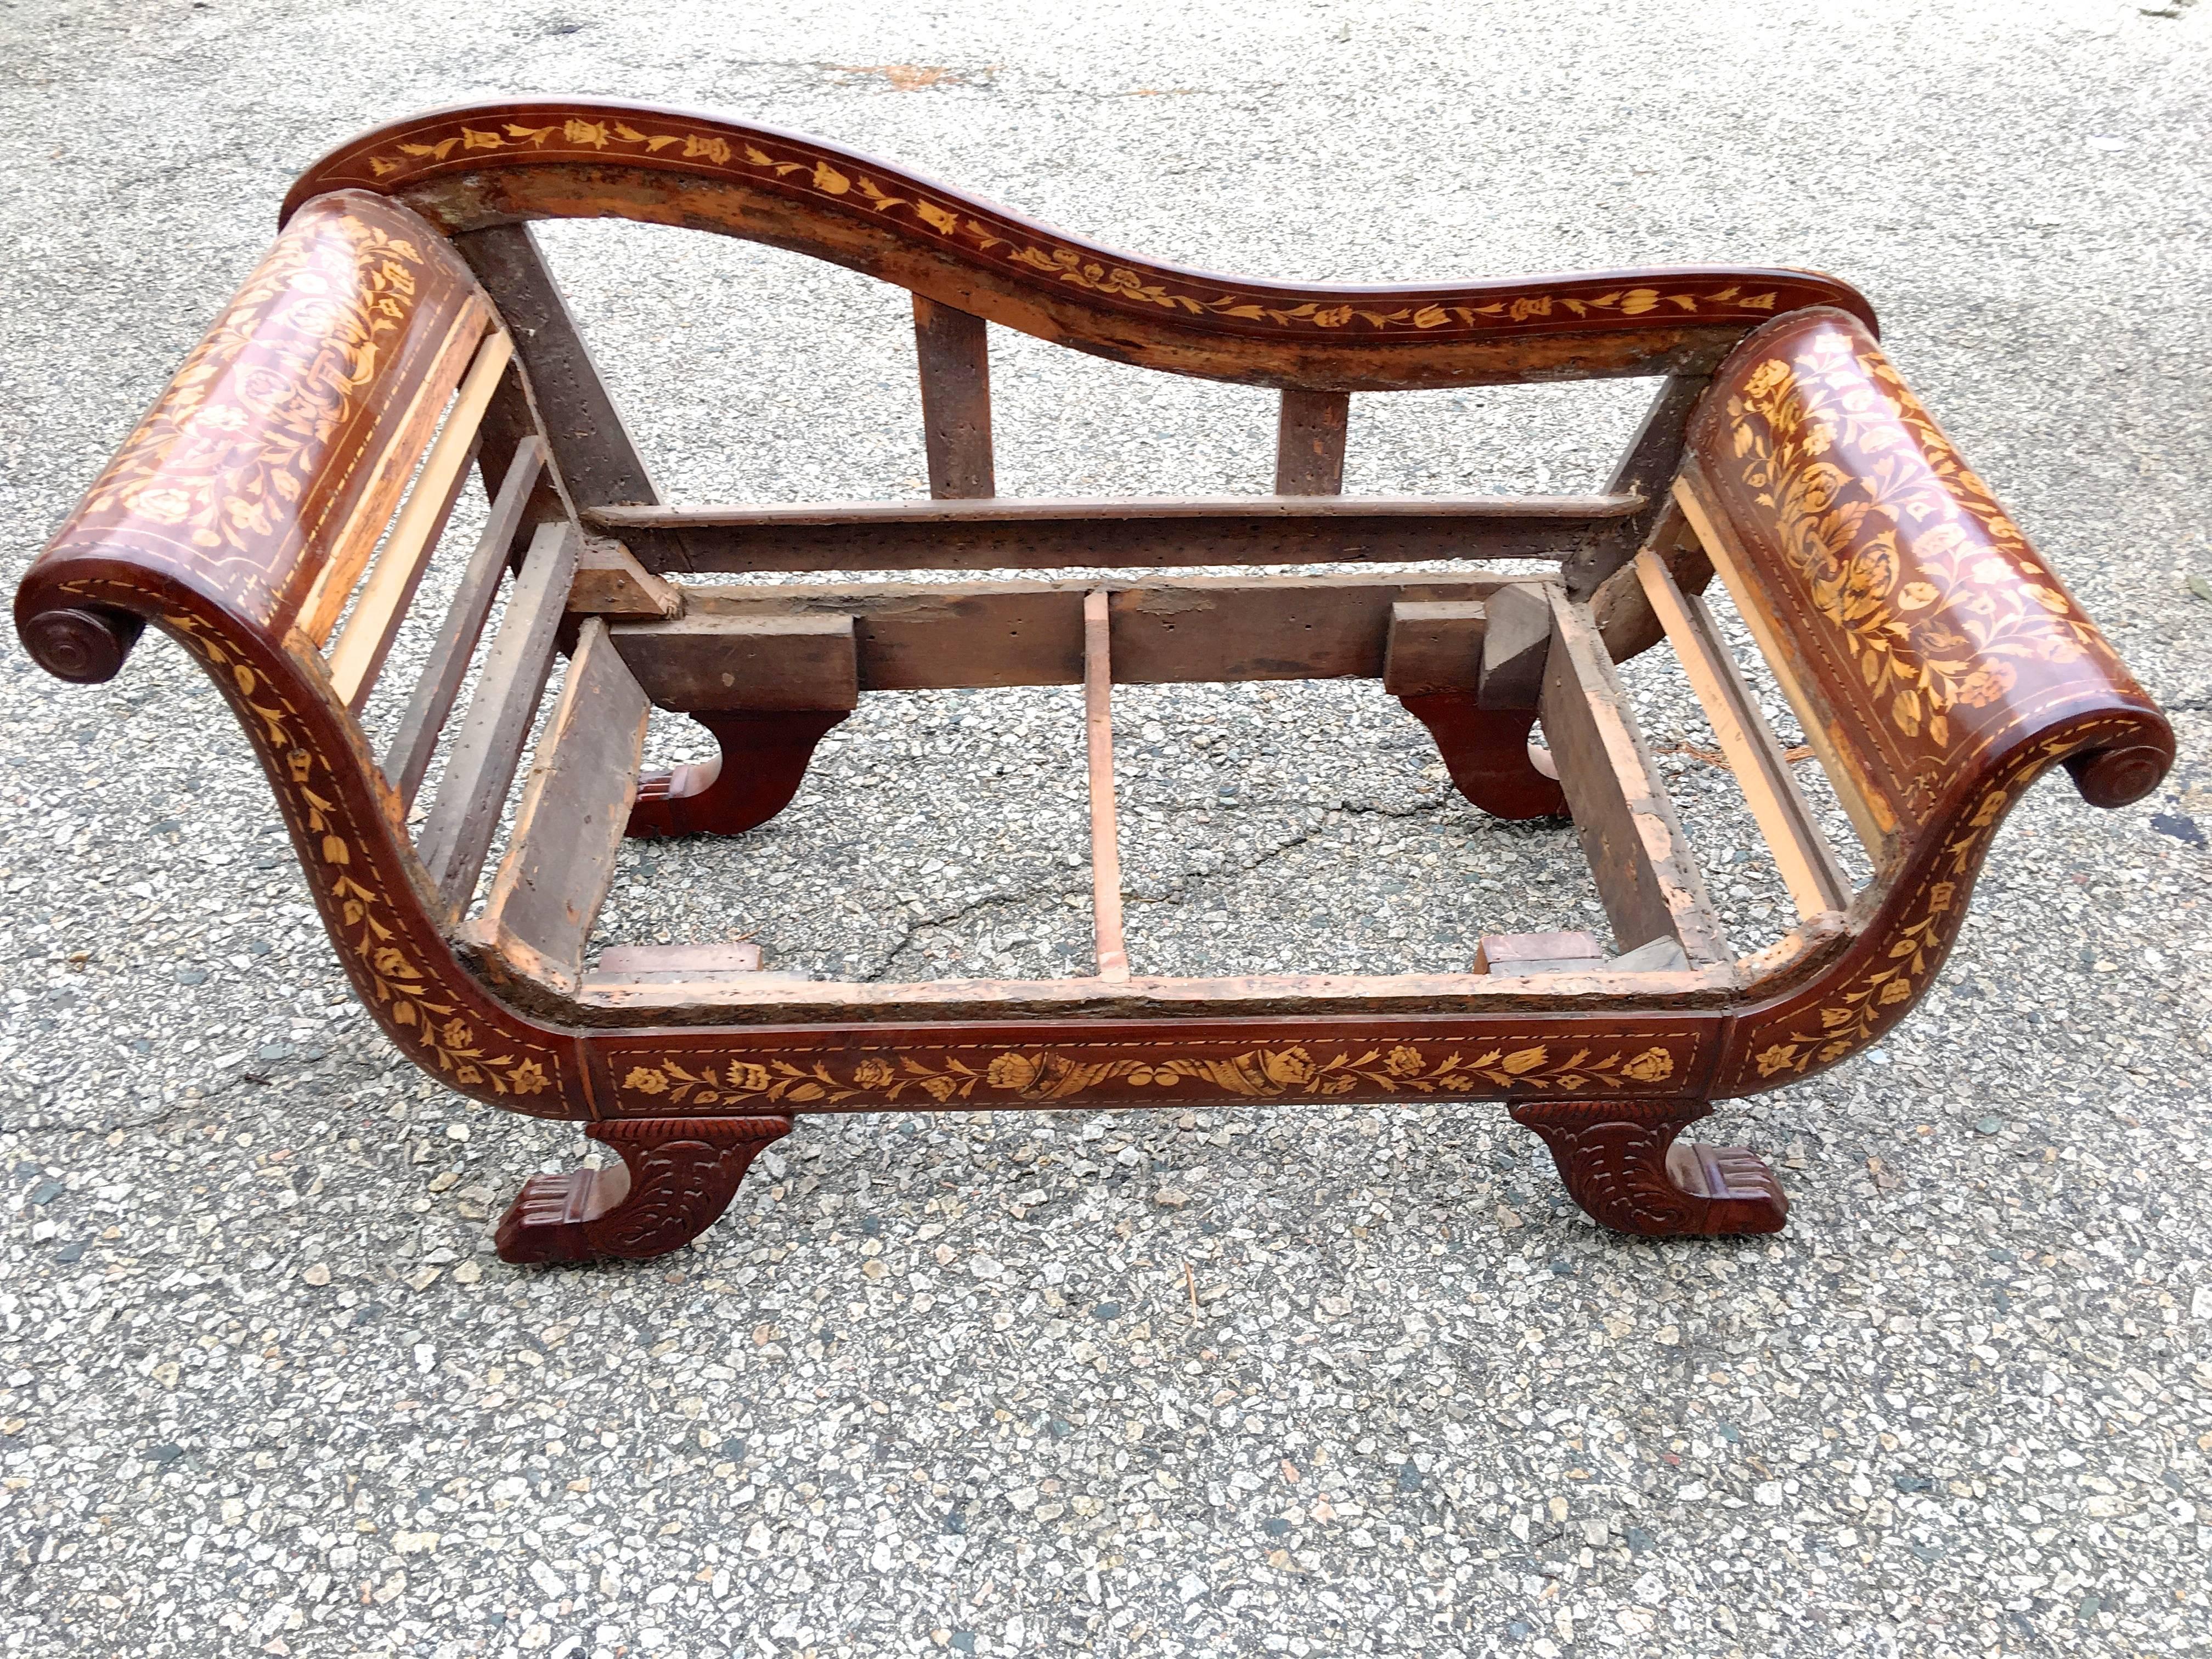 Dutch Colonial Dutch Recamier Mahogany Chaise with Satinwood Marquetry Inlay, circa 1825